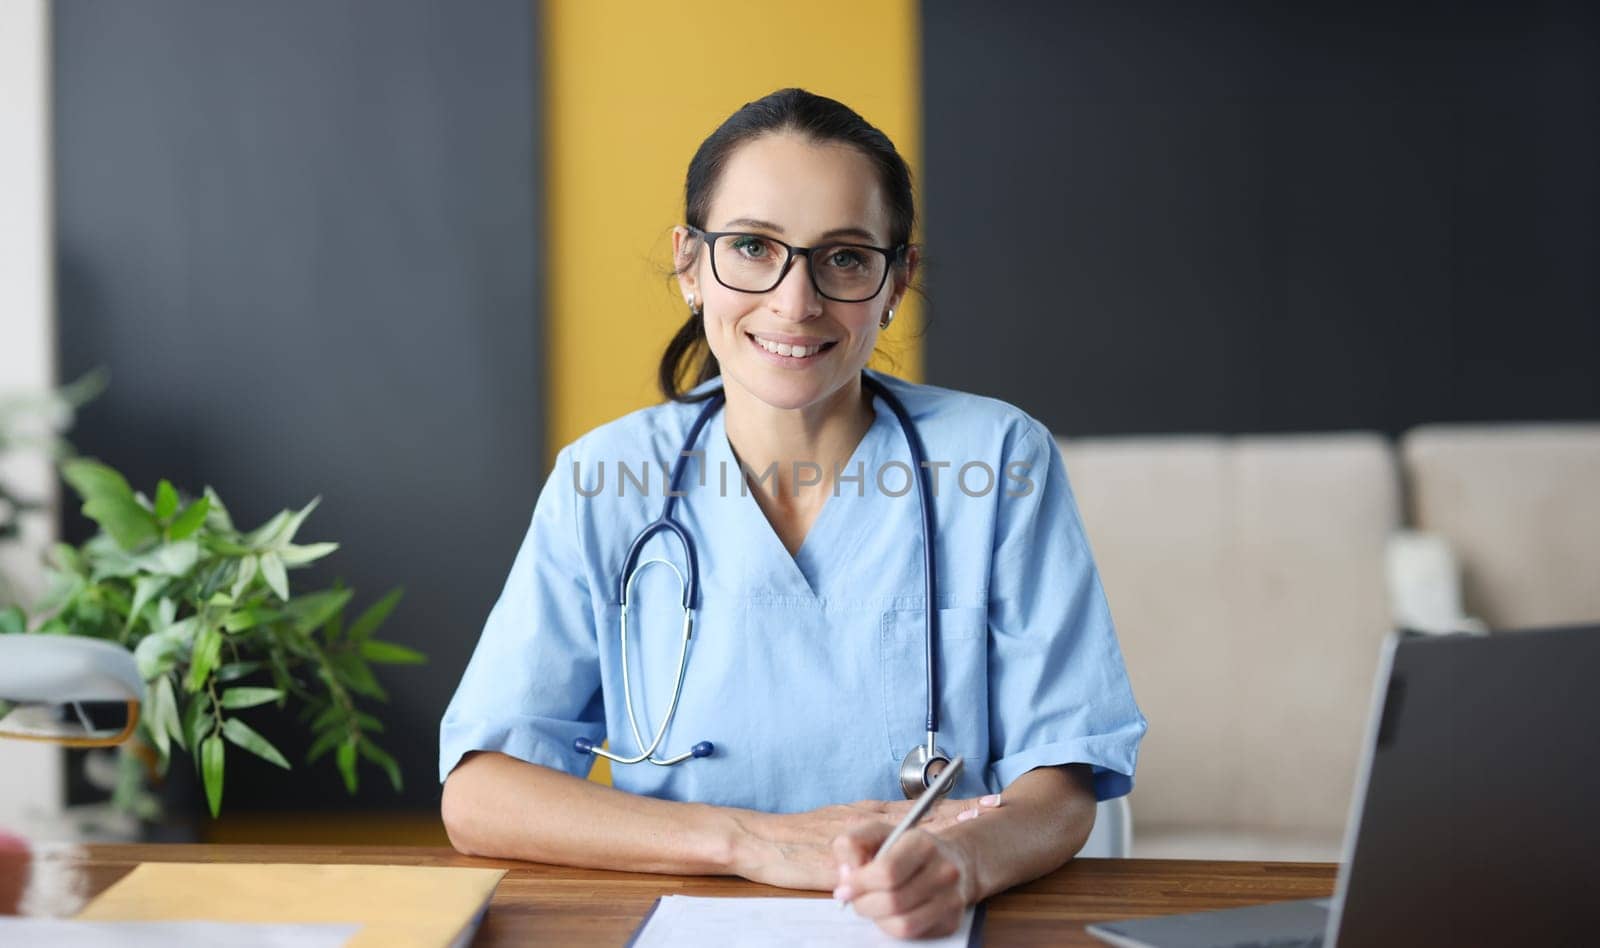 Woman doctor with glasses filling out medical history. Medical paperwork concept